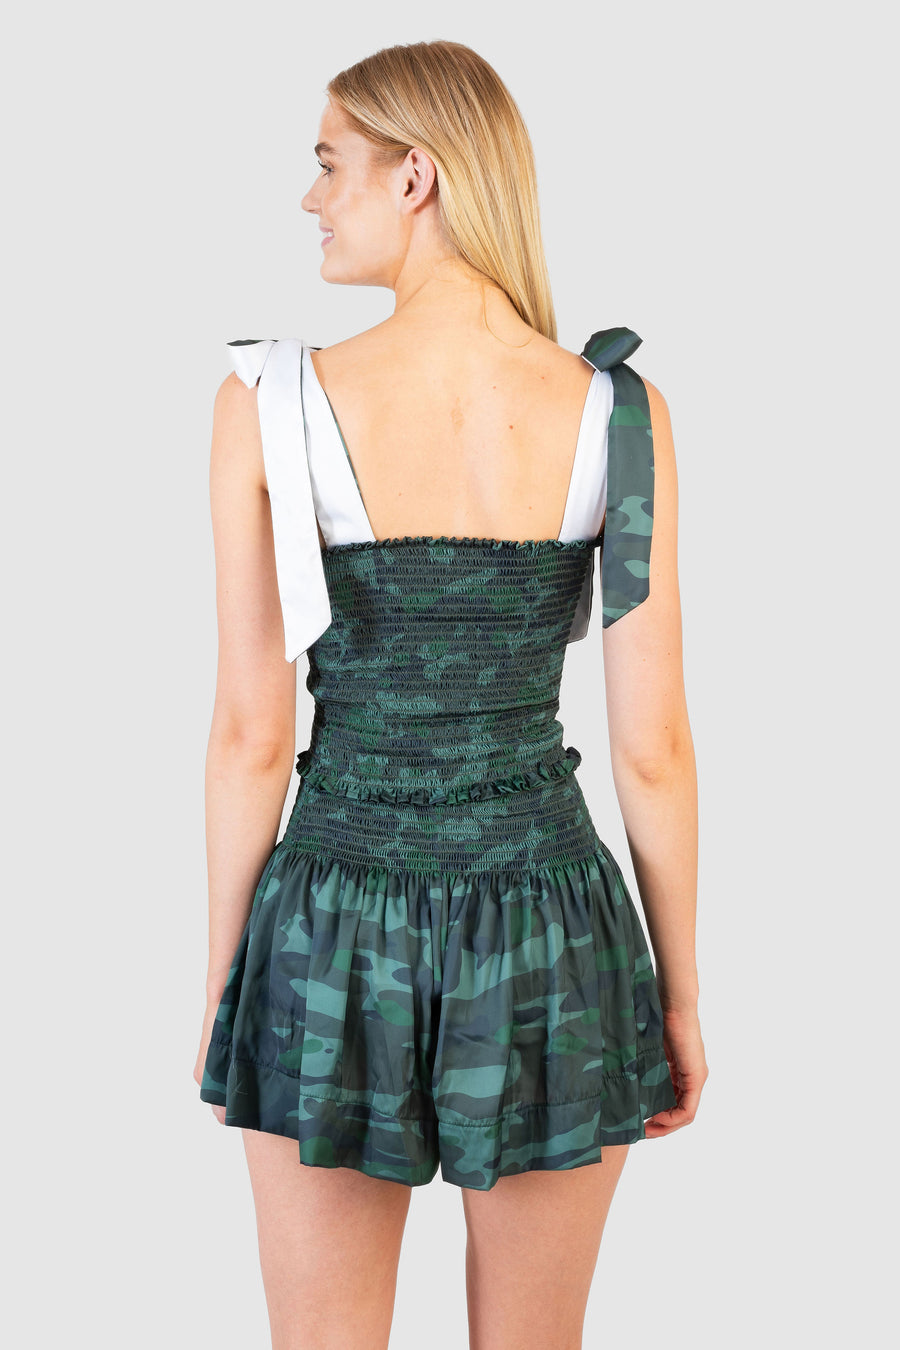 Erica Skirt Green Camo *Limited*Edition*